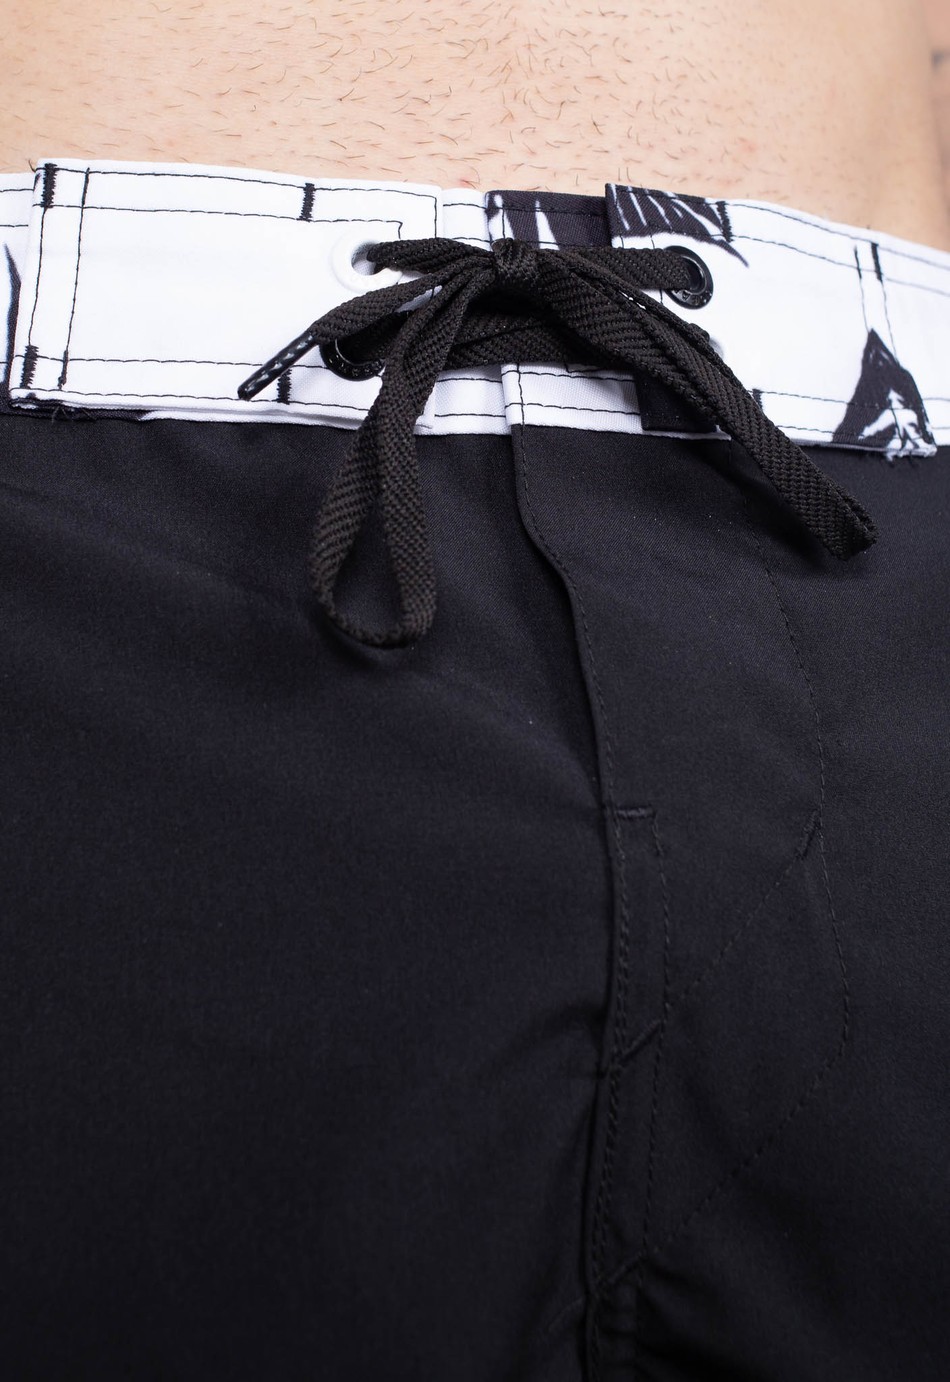 BERMUDA BOARDSHORT OCEANO RETRO BW COLLAB PRESERVING OUR ROOTS